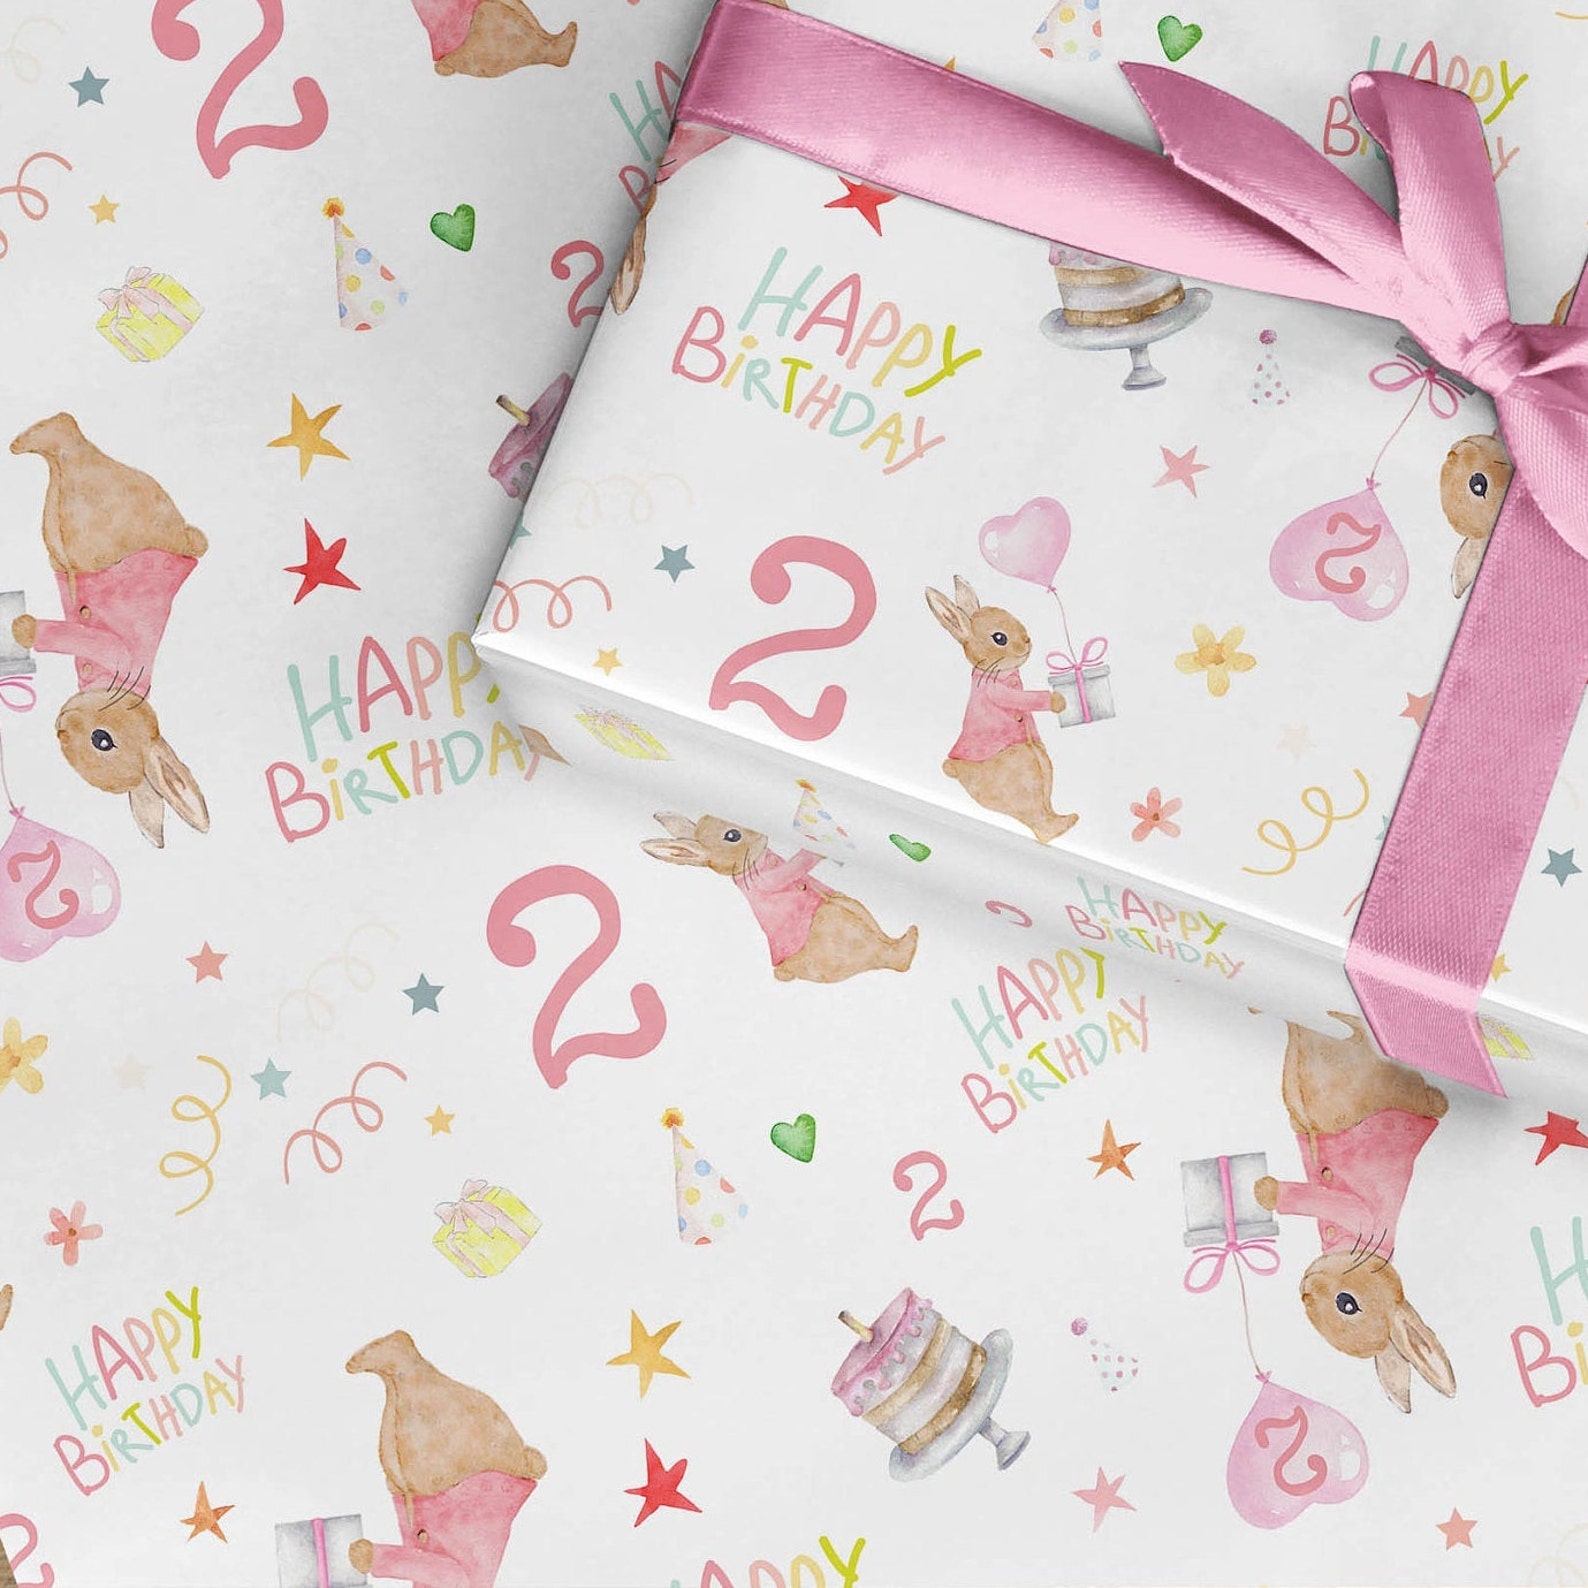 Kids 2nd Birthday Wrapping Paper Number 2 Birthday Boy | Etsy